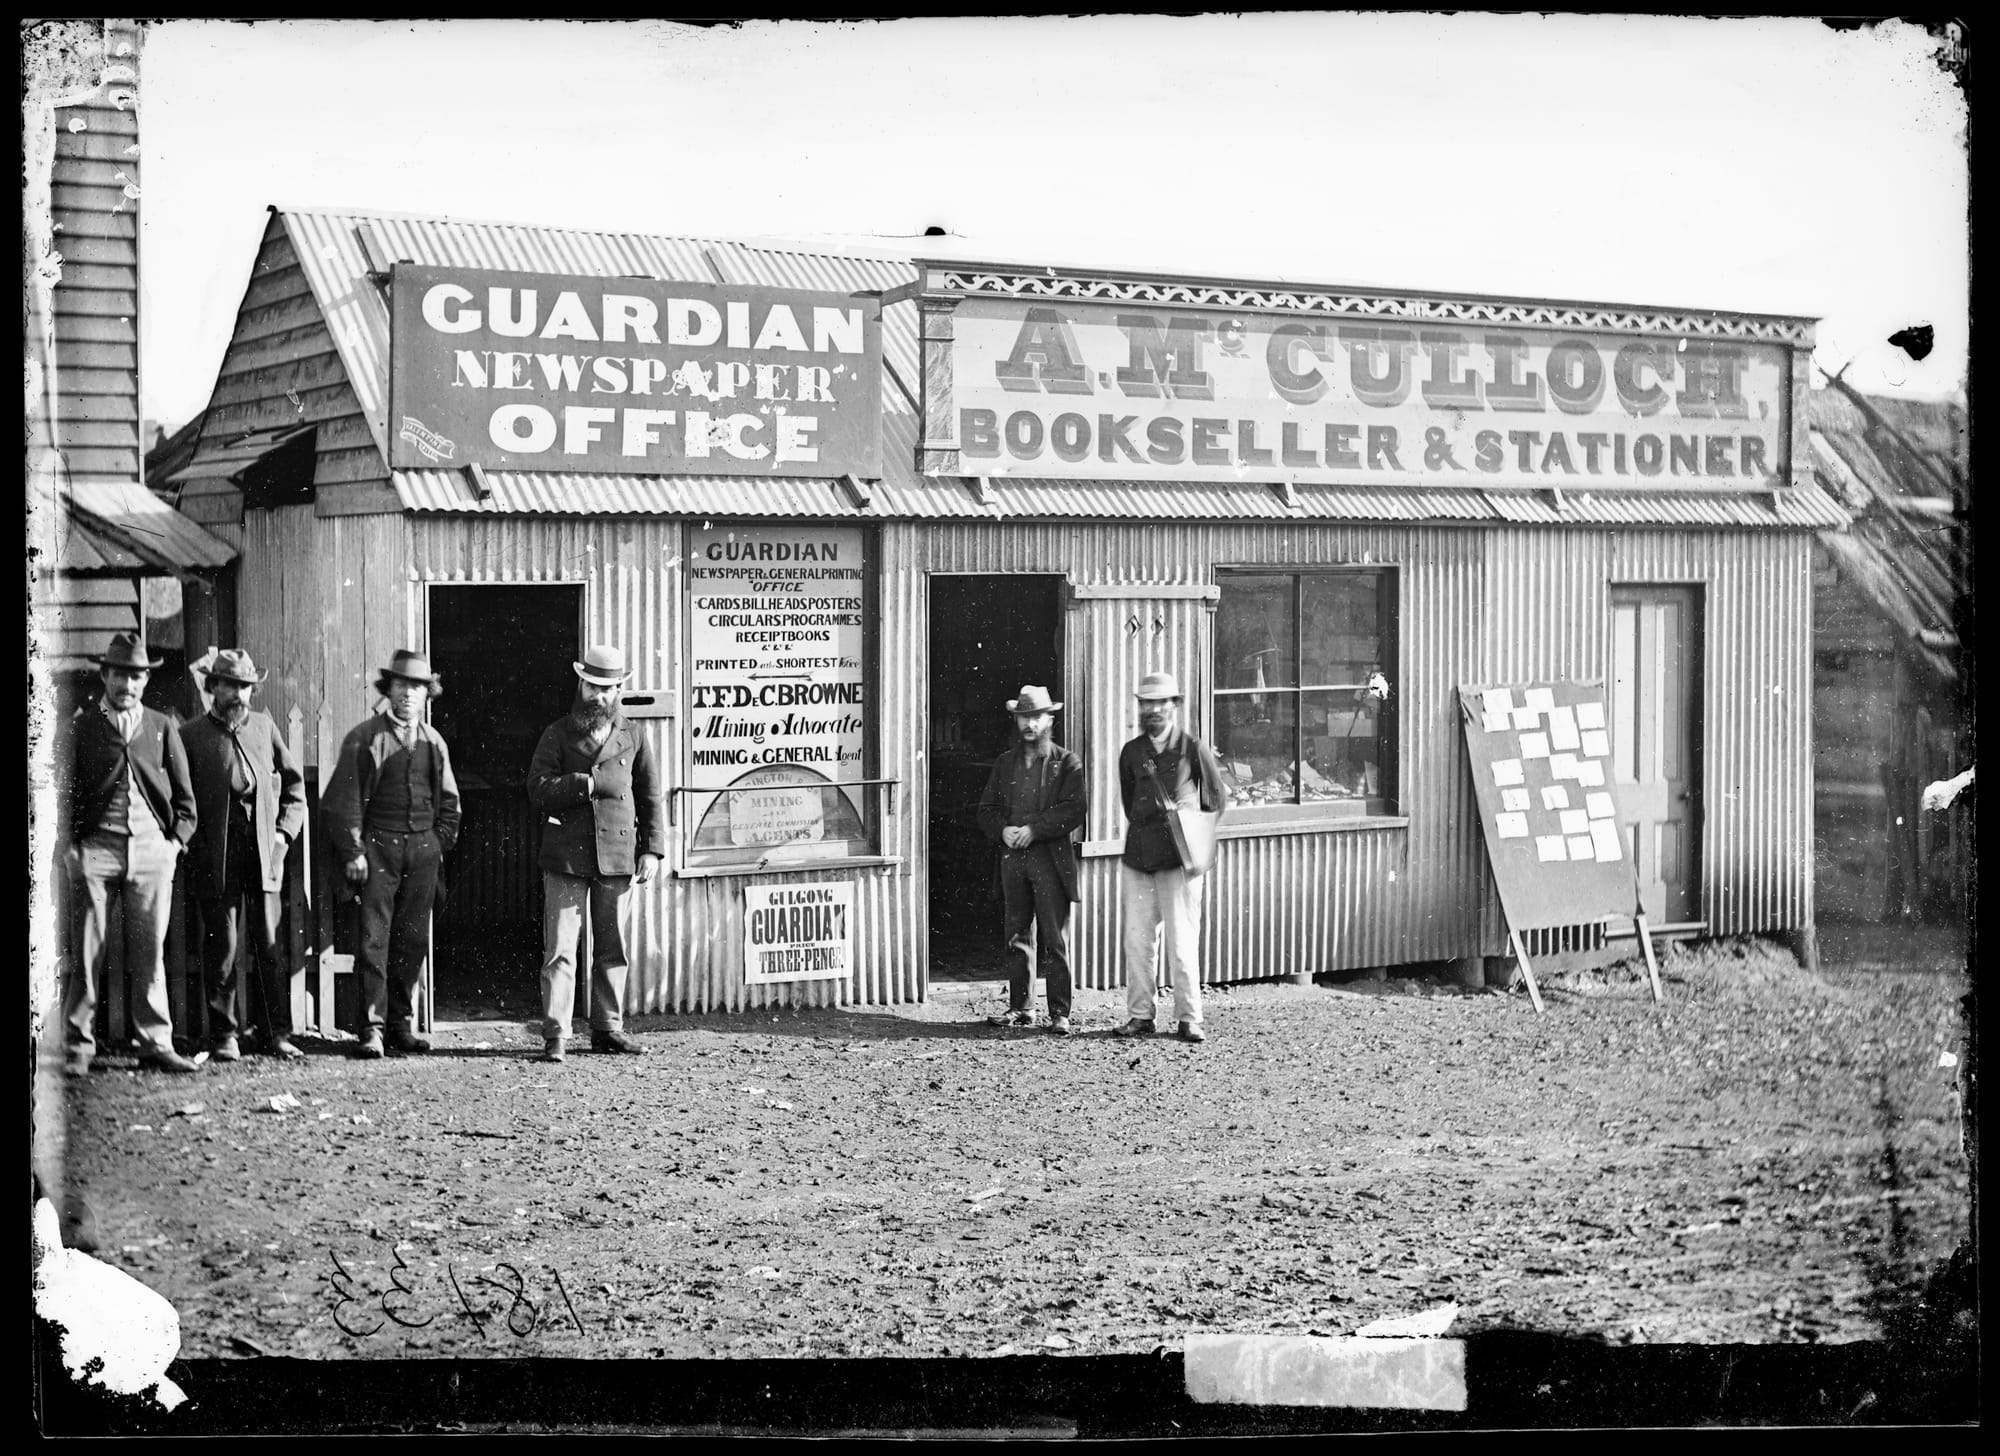 Smartly dressed me standing in front of a basic structure with signs advertising the Guardian Newspaper Office and A. McCulloch bookseller and stationer.